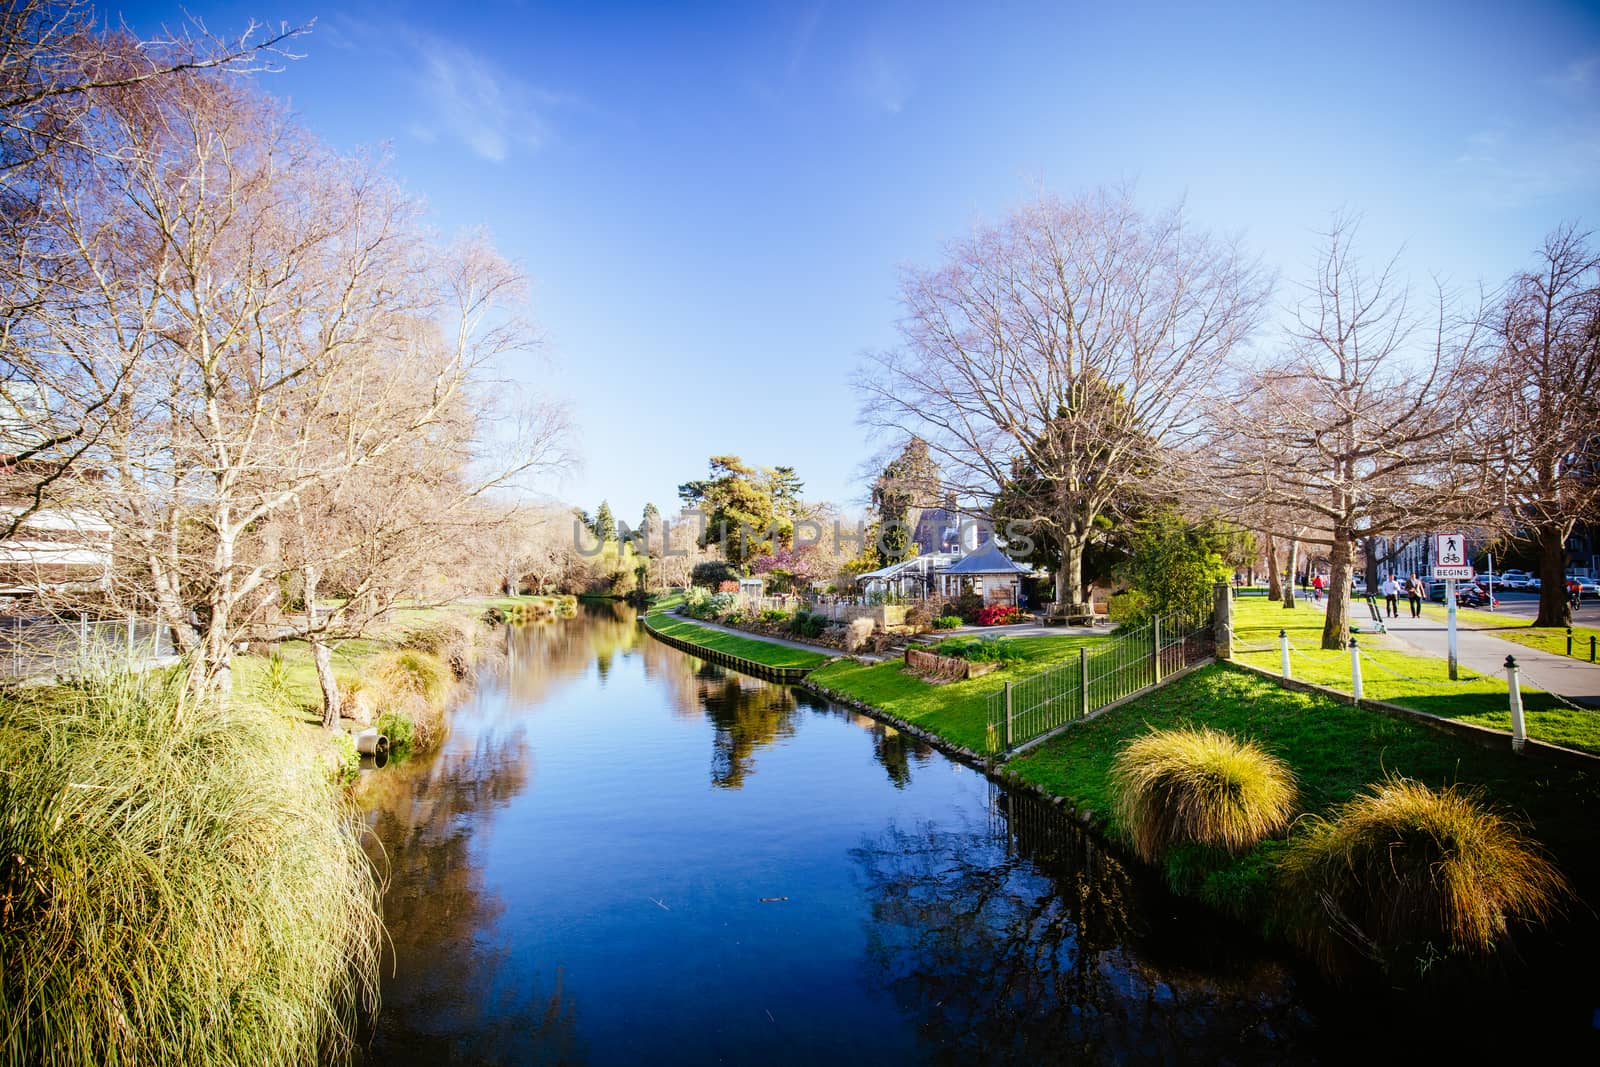 The popular tourst attraction of Christchurch Botanic Gardens on a warm spring day in New Zealand